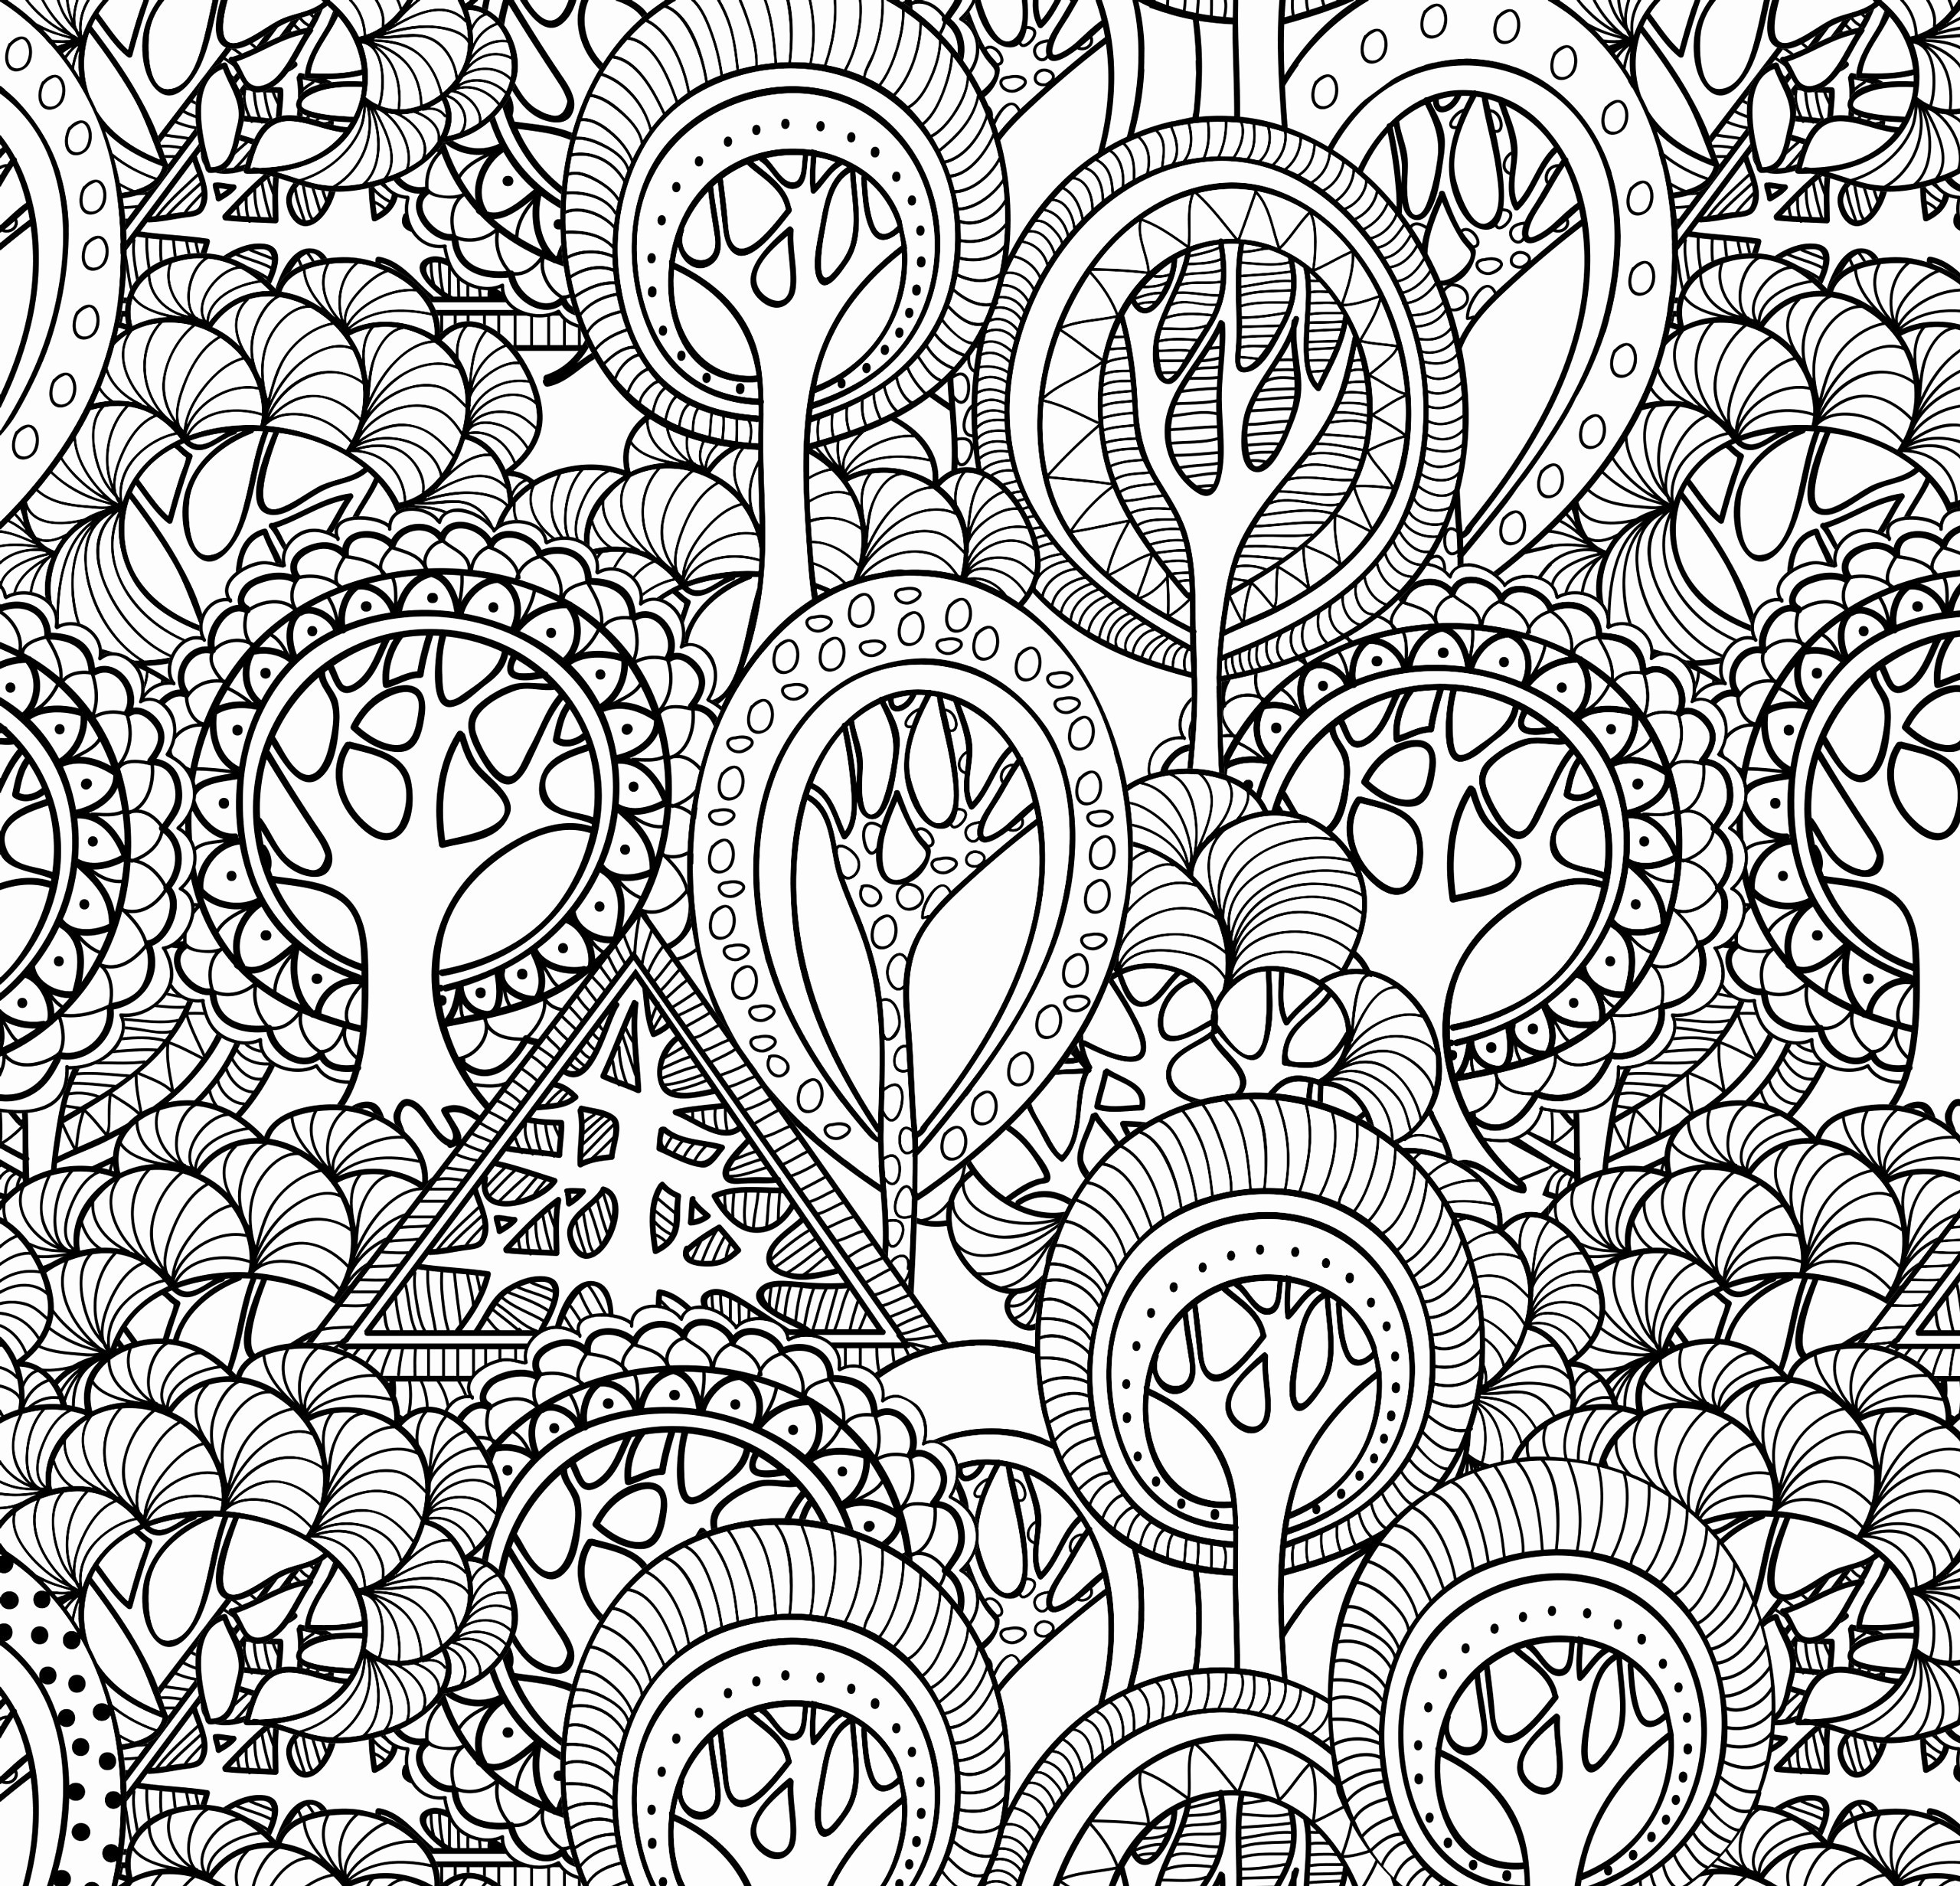 15 Best Cheap Fish Bowl Vases 2024 free download cheap fish bowl vases of free fish coloring pages unique betta fish coloring pages awesome throughout free fish coloring pages new free fish coloring pages printable new best od dog coloring